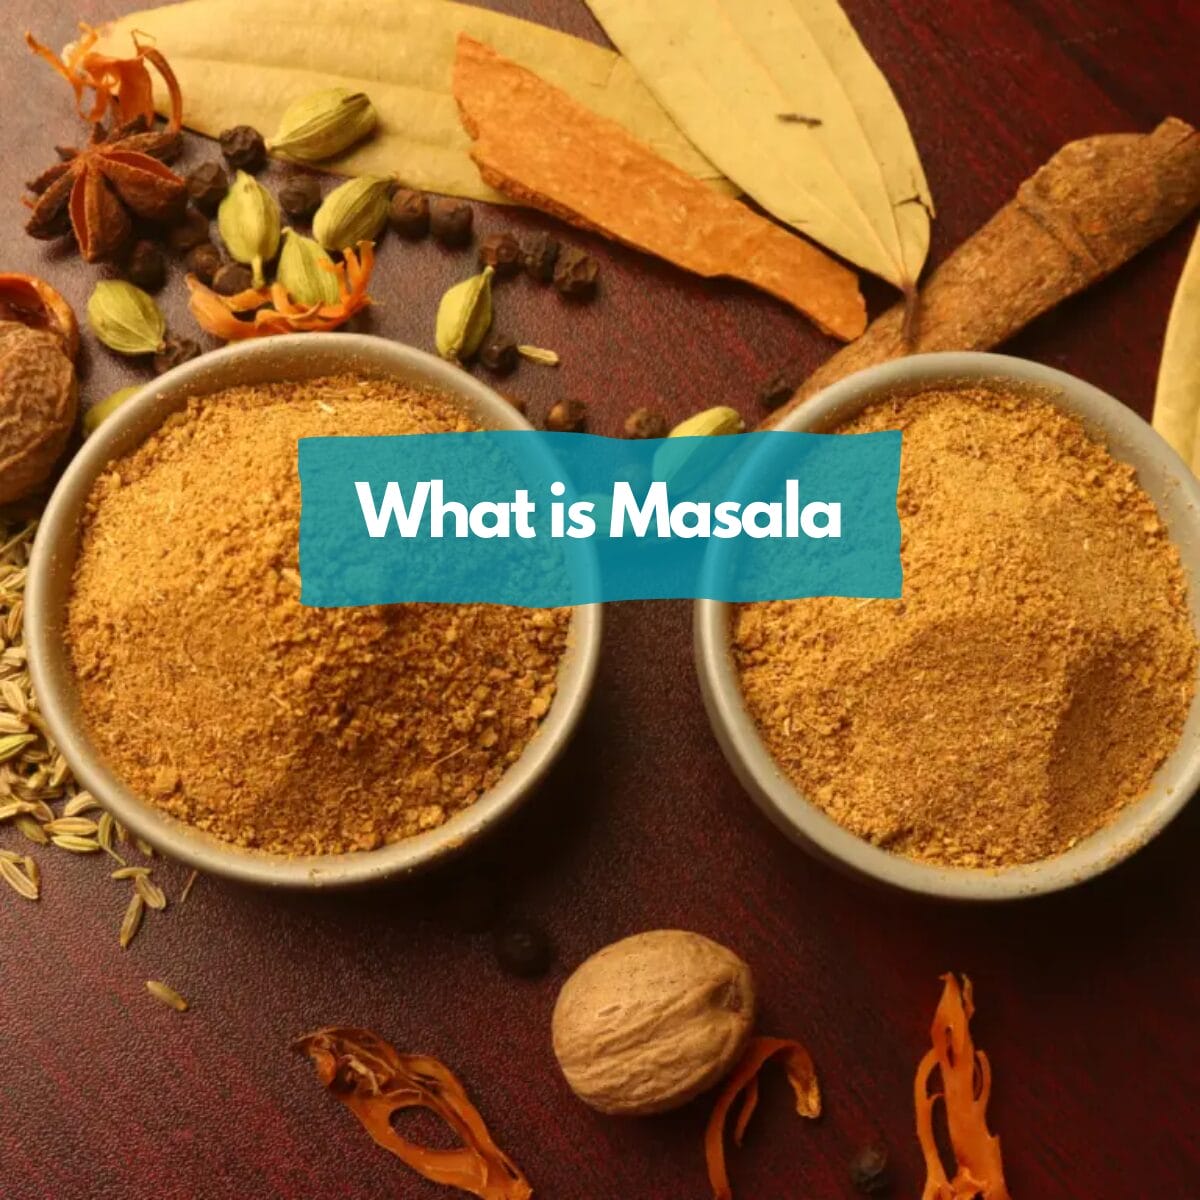 What is Masala